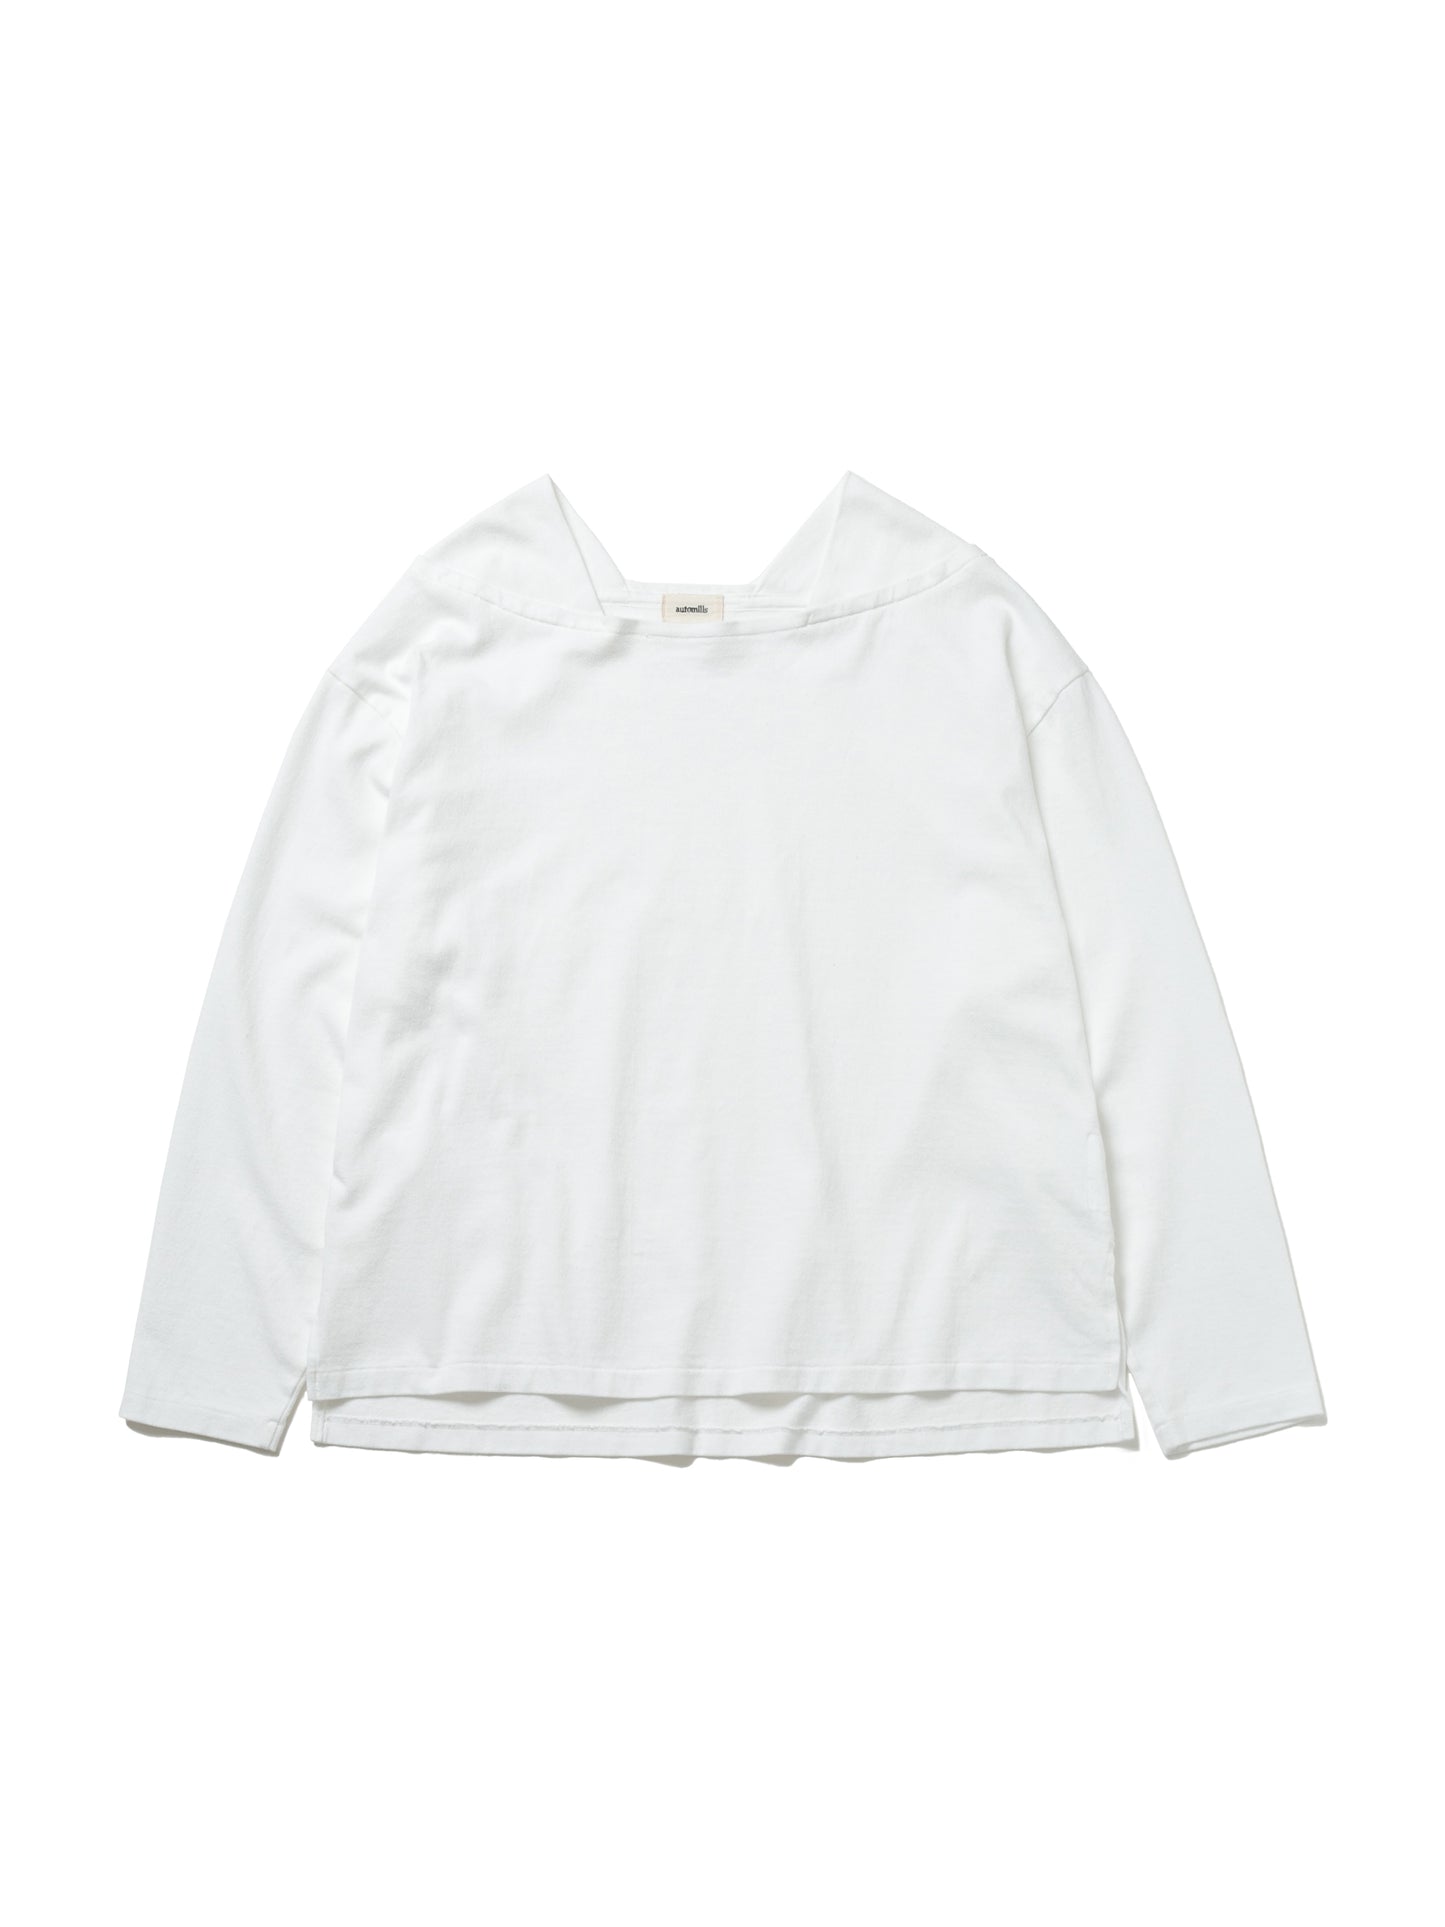 BAGGY BOAT L/S TEE COTTON JERSEY AM-C0107 White